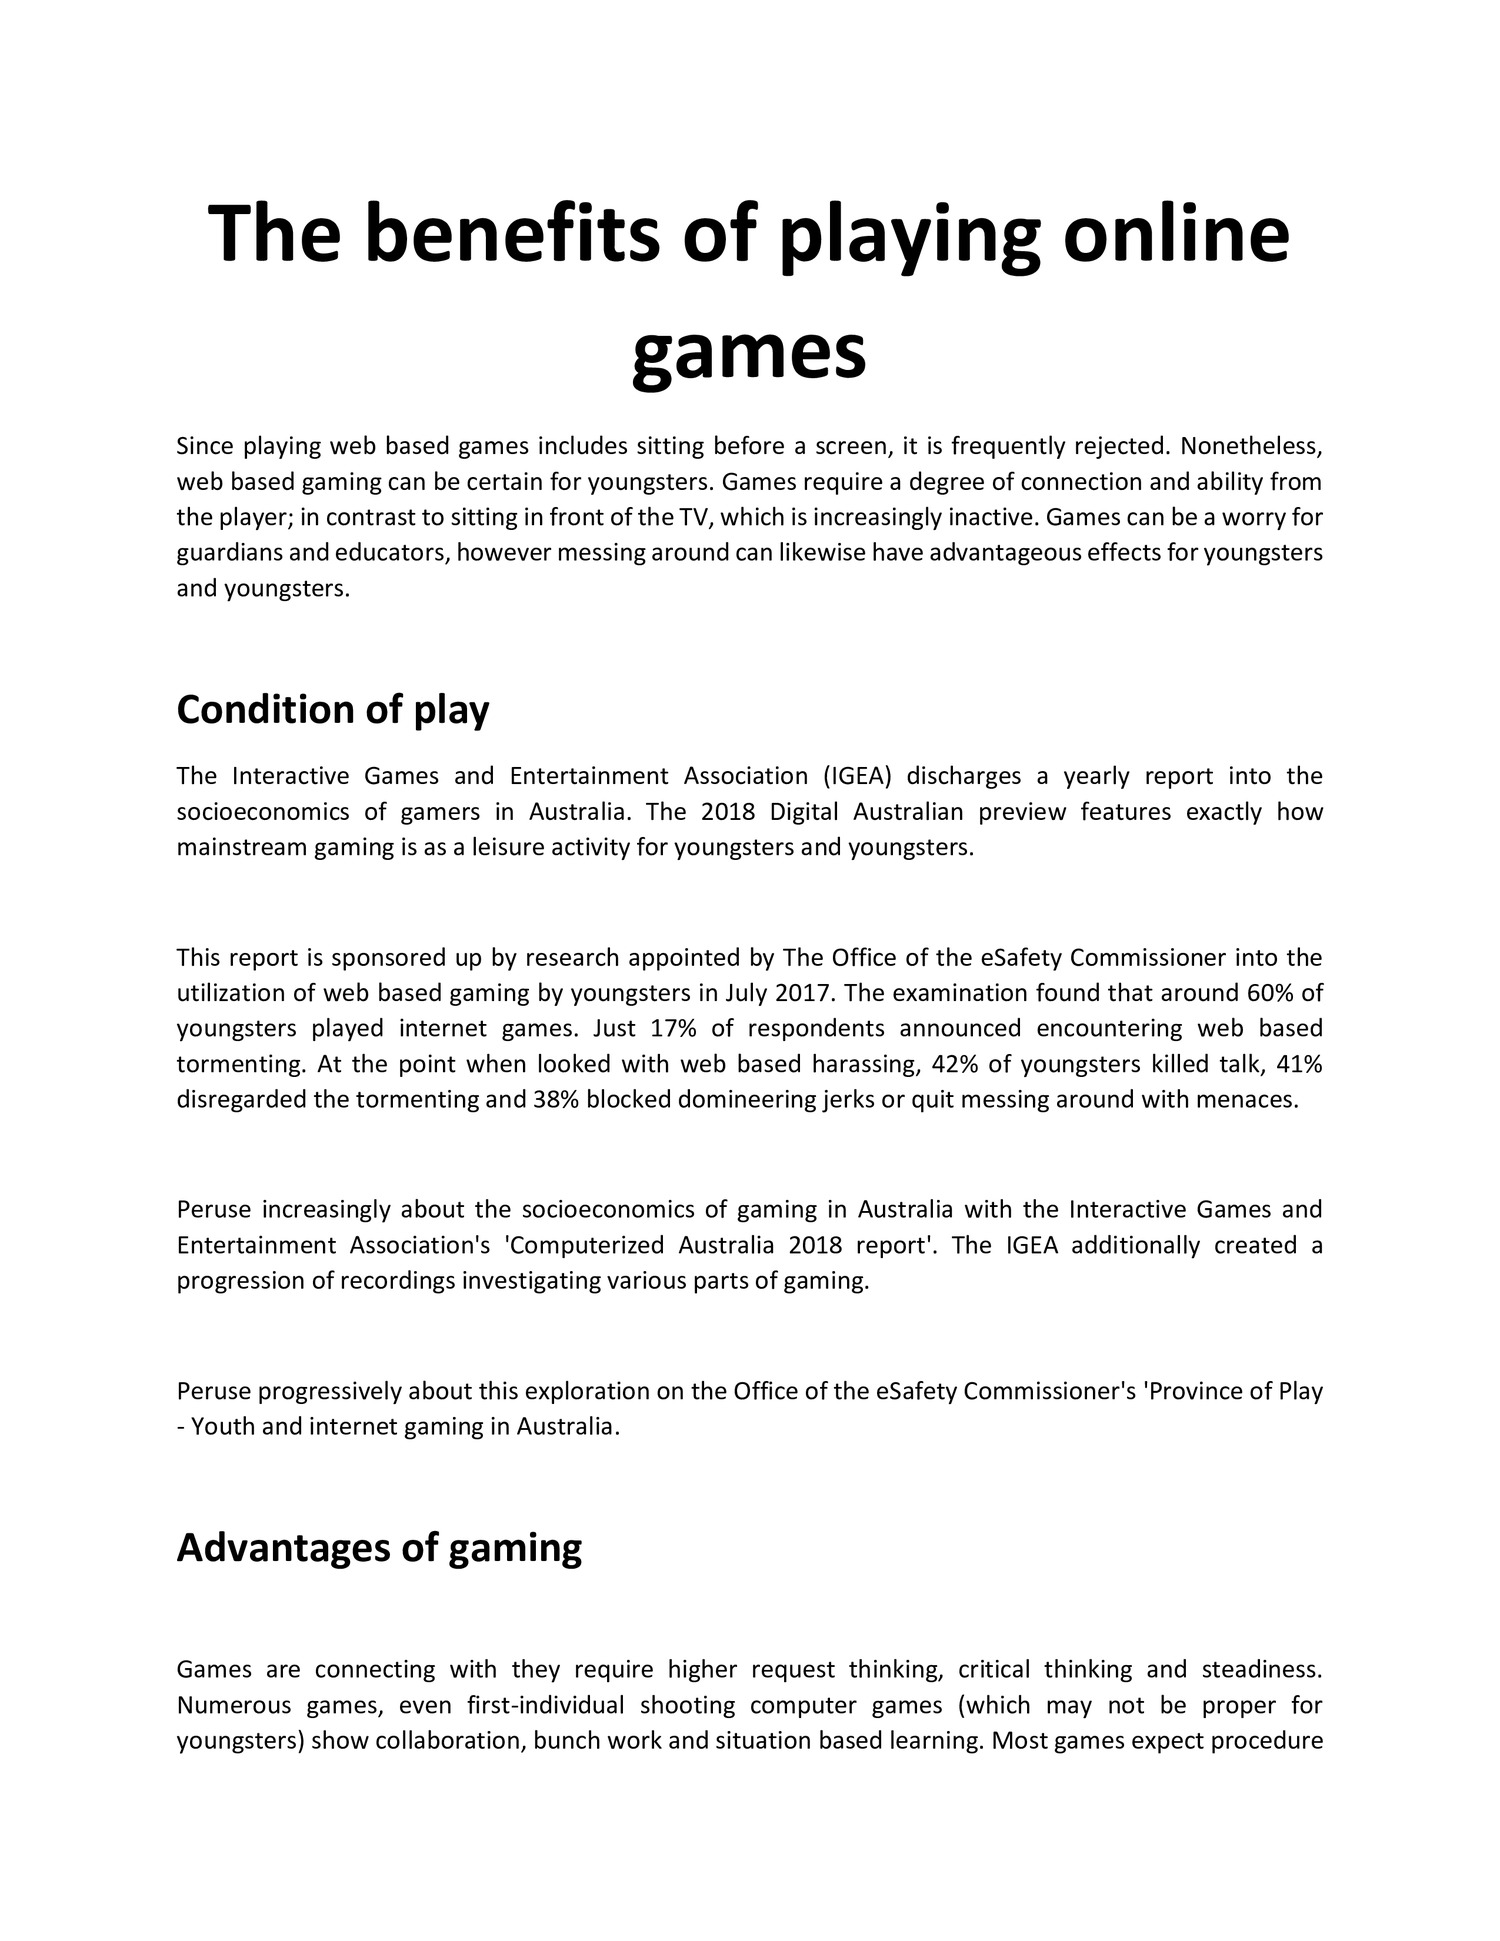 An Opinion on the Benefits of Online Games